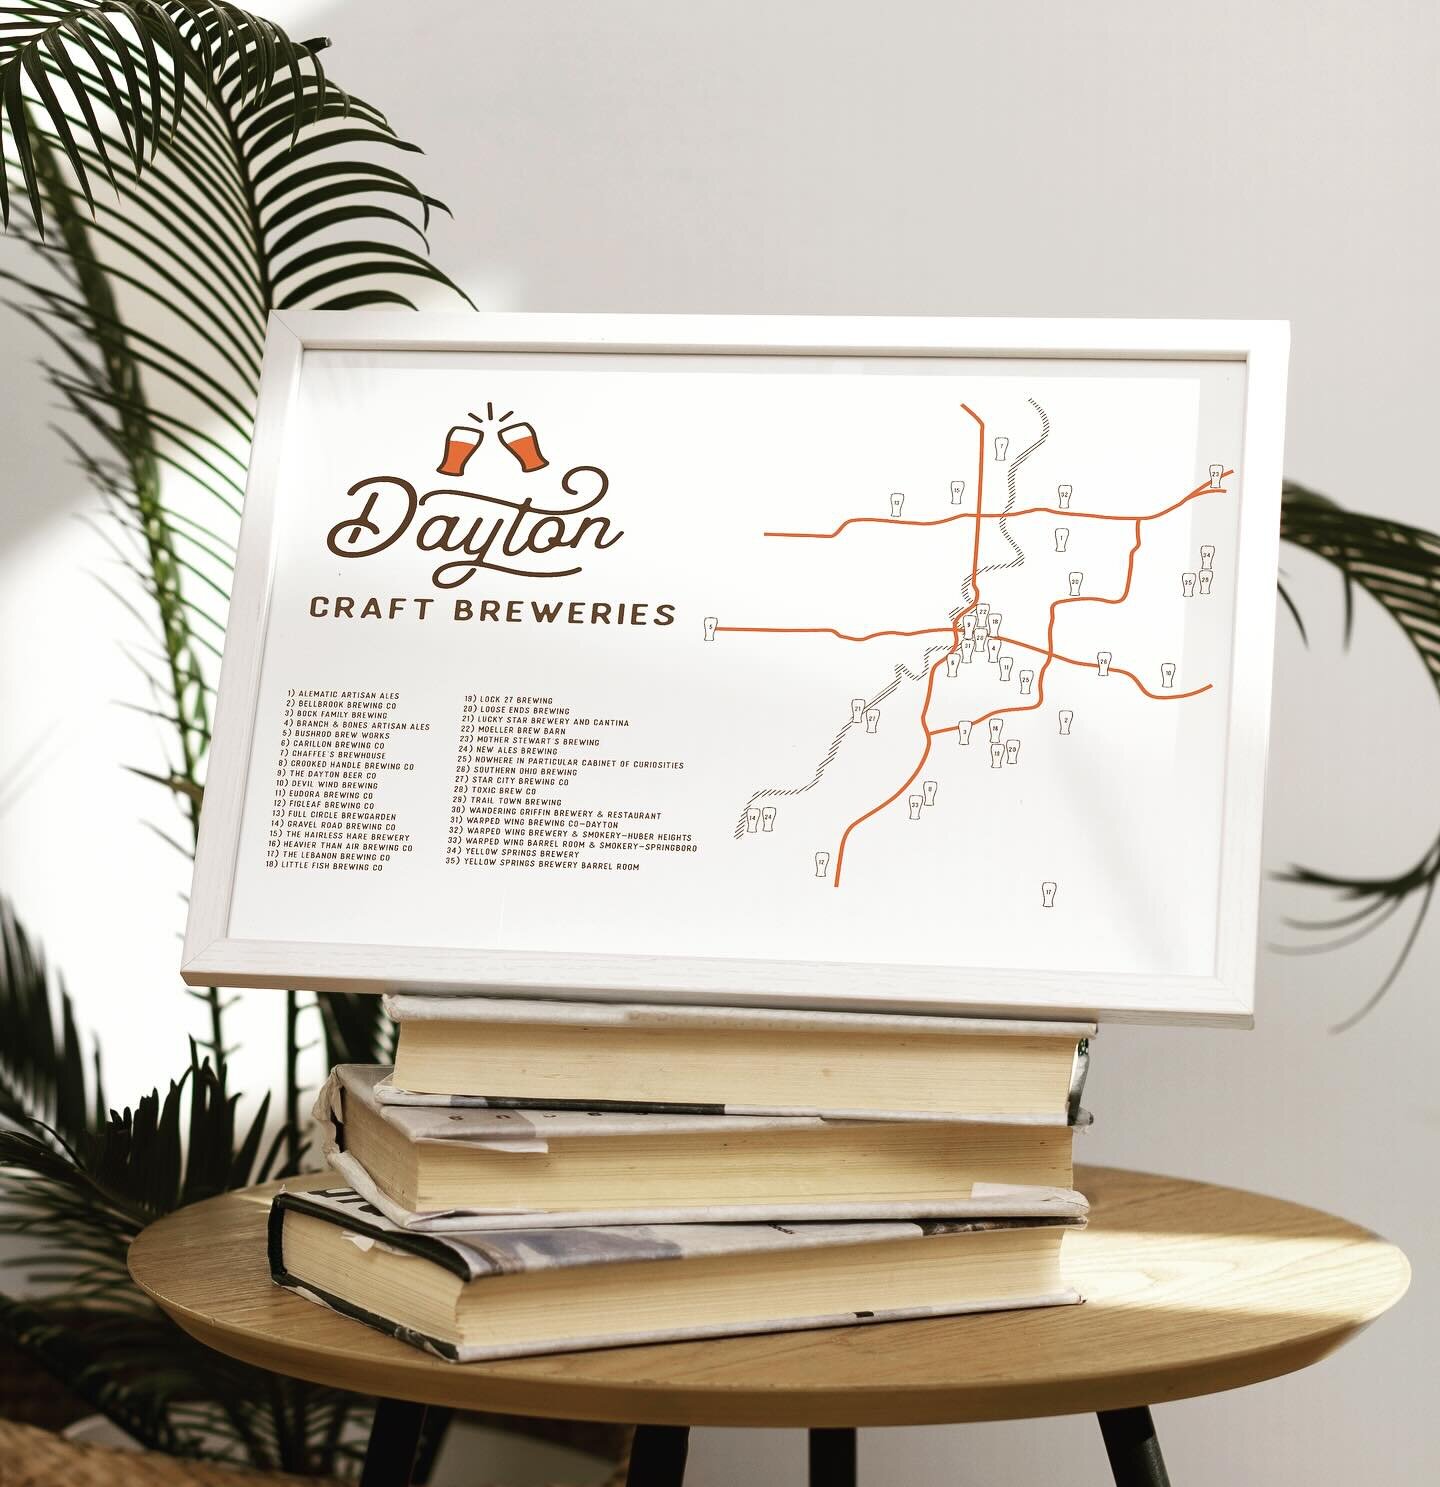 Cincy Brew Maps has officially expanded into Dayton! A new city means new breweries to explore and even MORE beers to try. Grab your map, peel off those stickers, and let the brew-venture begin! Shop the new map on our website, link in bio. 🍻